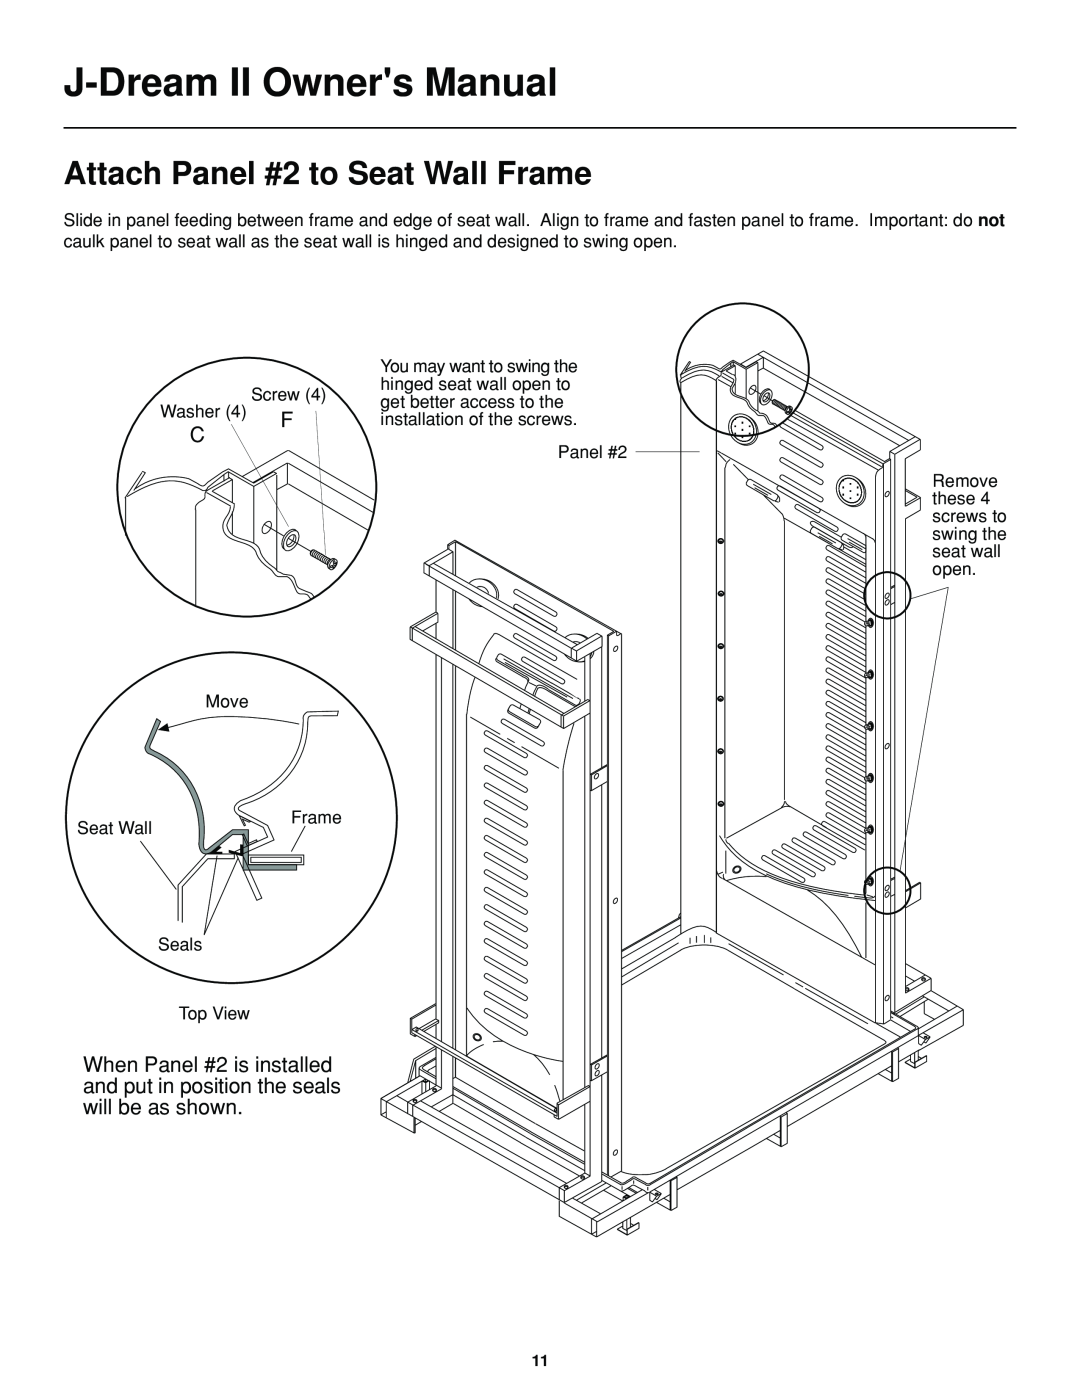 Jacuzzi J-DREAM II owner manual Attach Panel #2 to Seat Wall Frame 